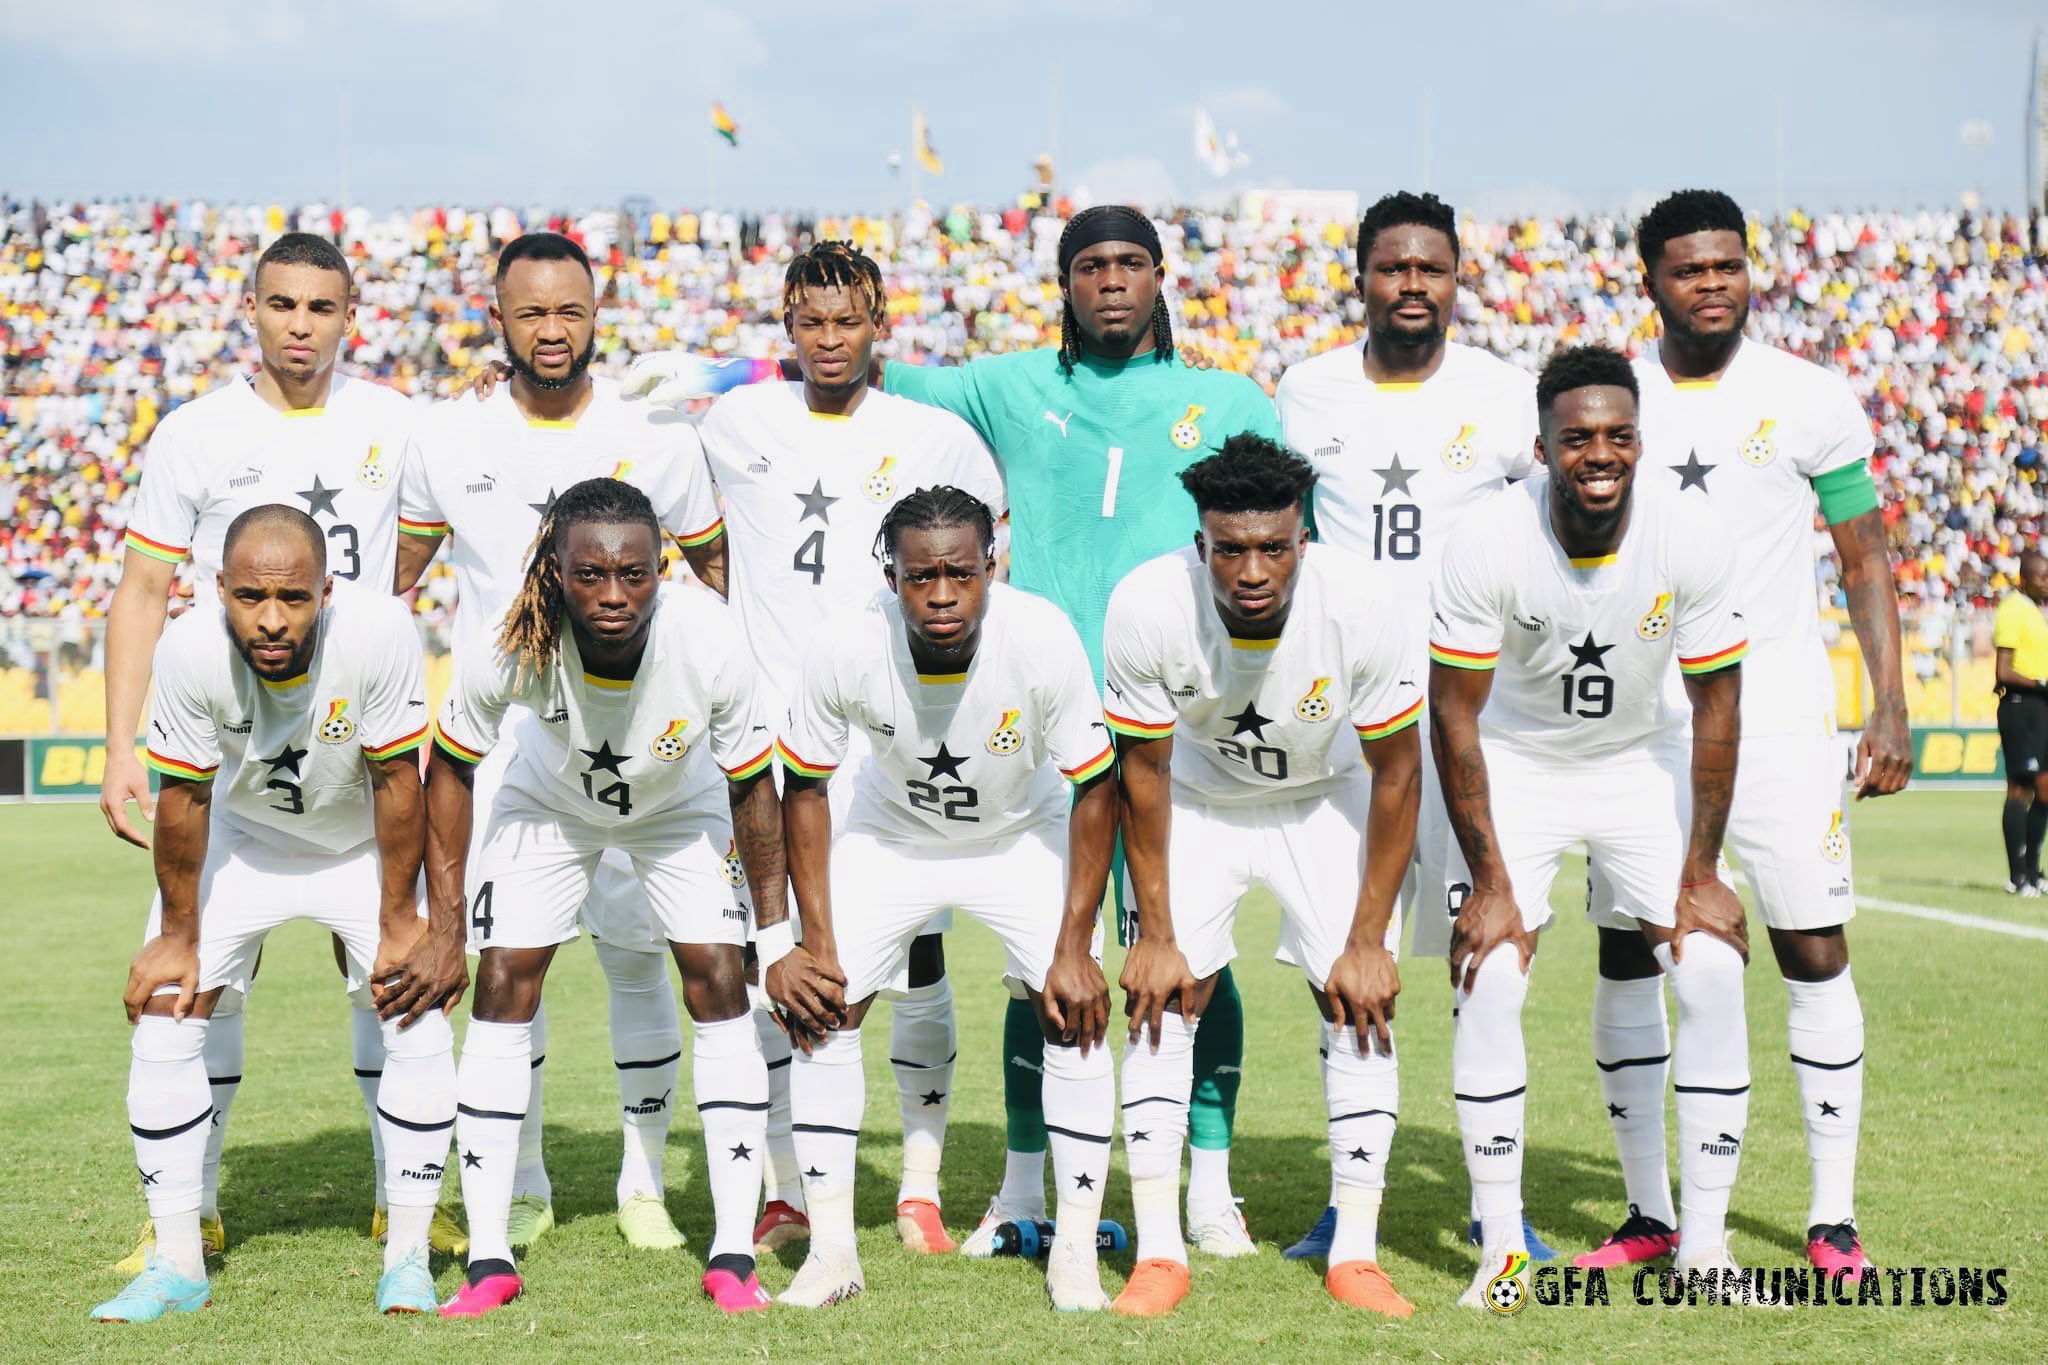 2023 Africa Cup of Nations qualifiers: Ghana coach Chris Hughton names starting eleven for Angola clash this evening - No Partey